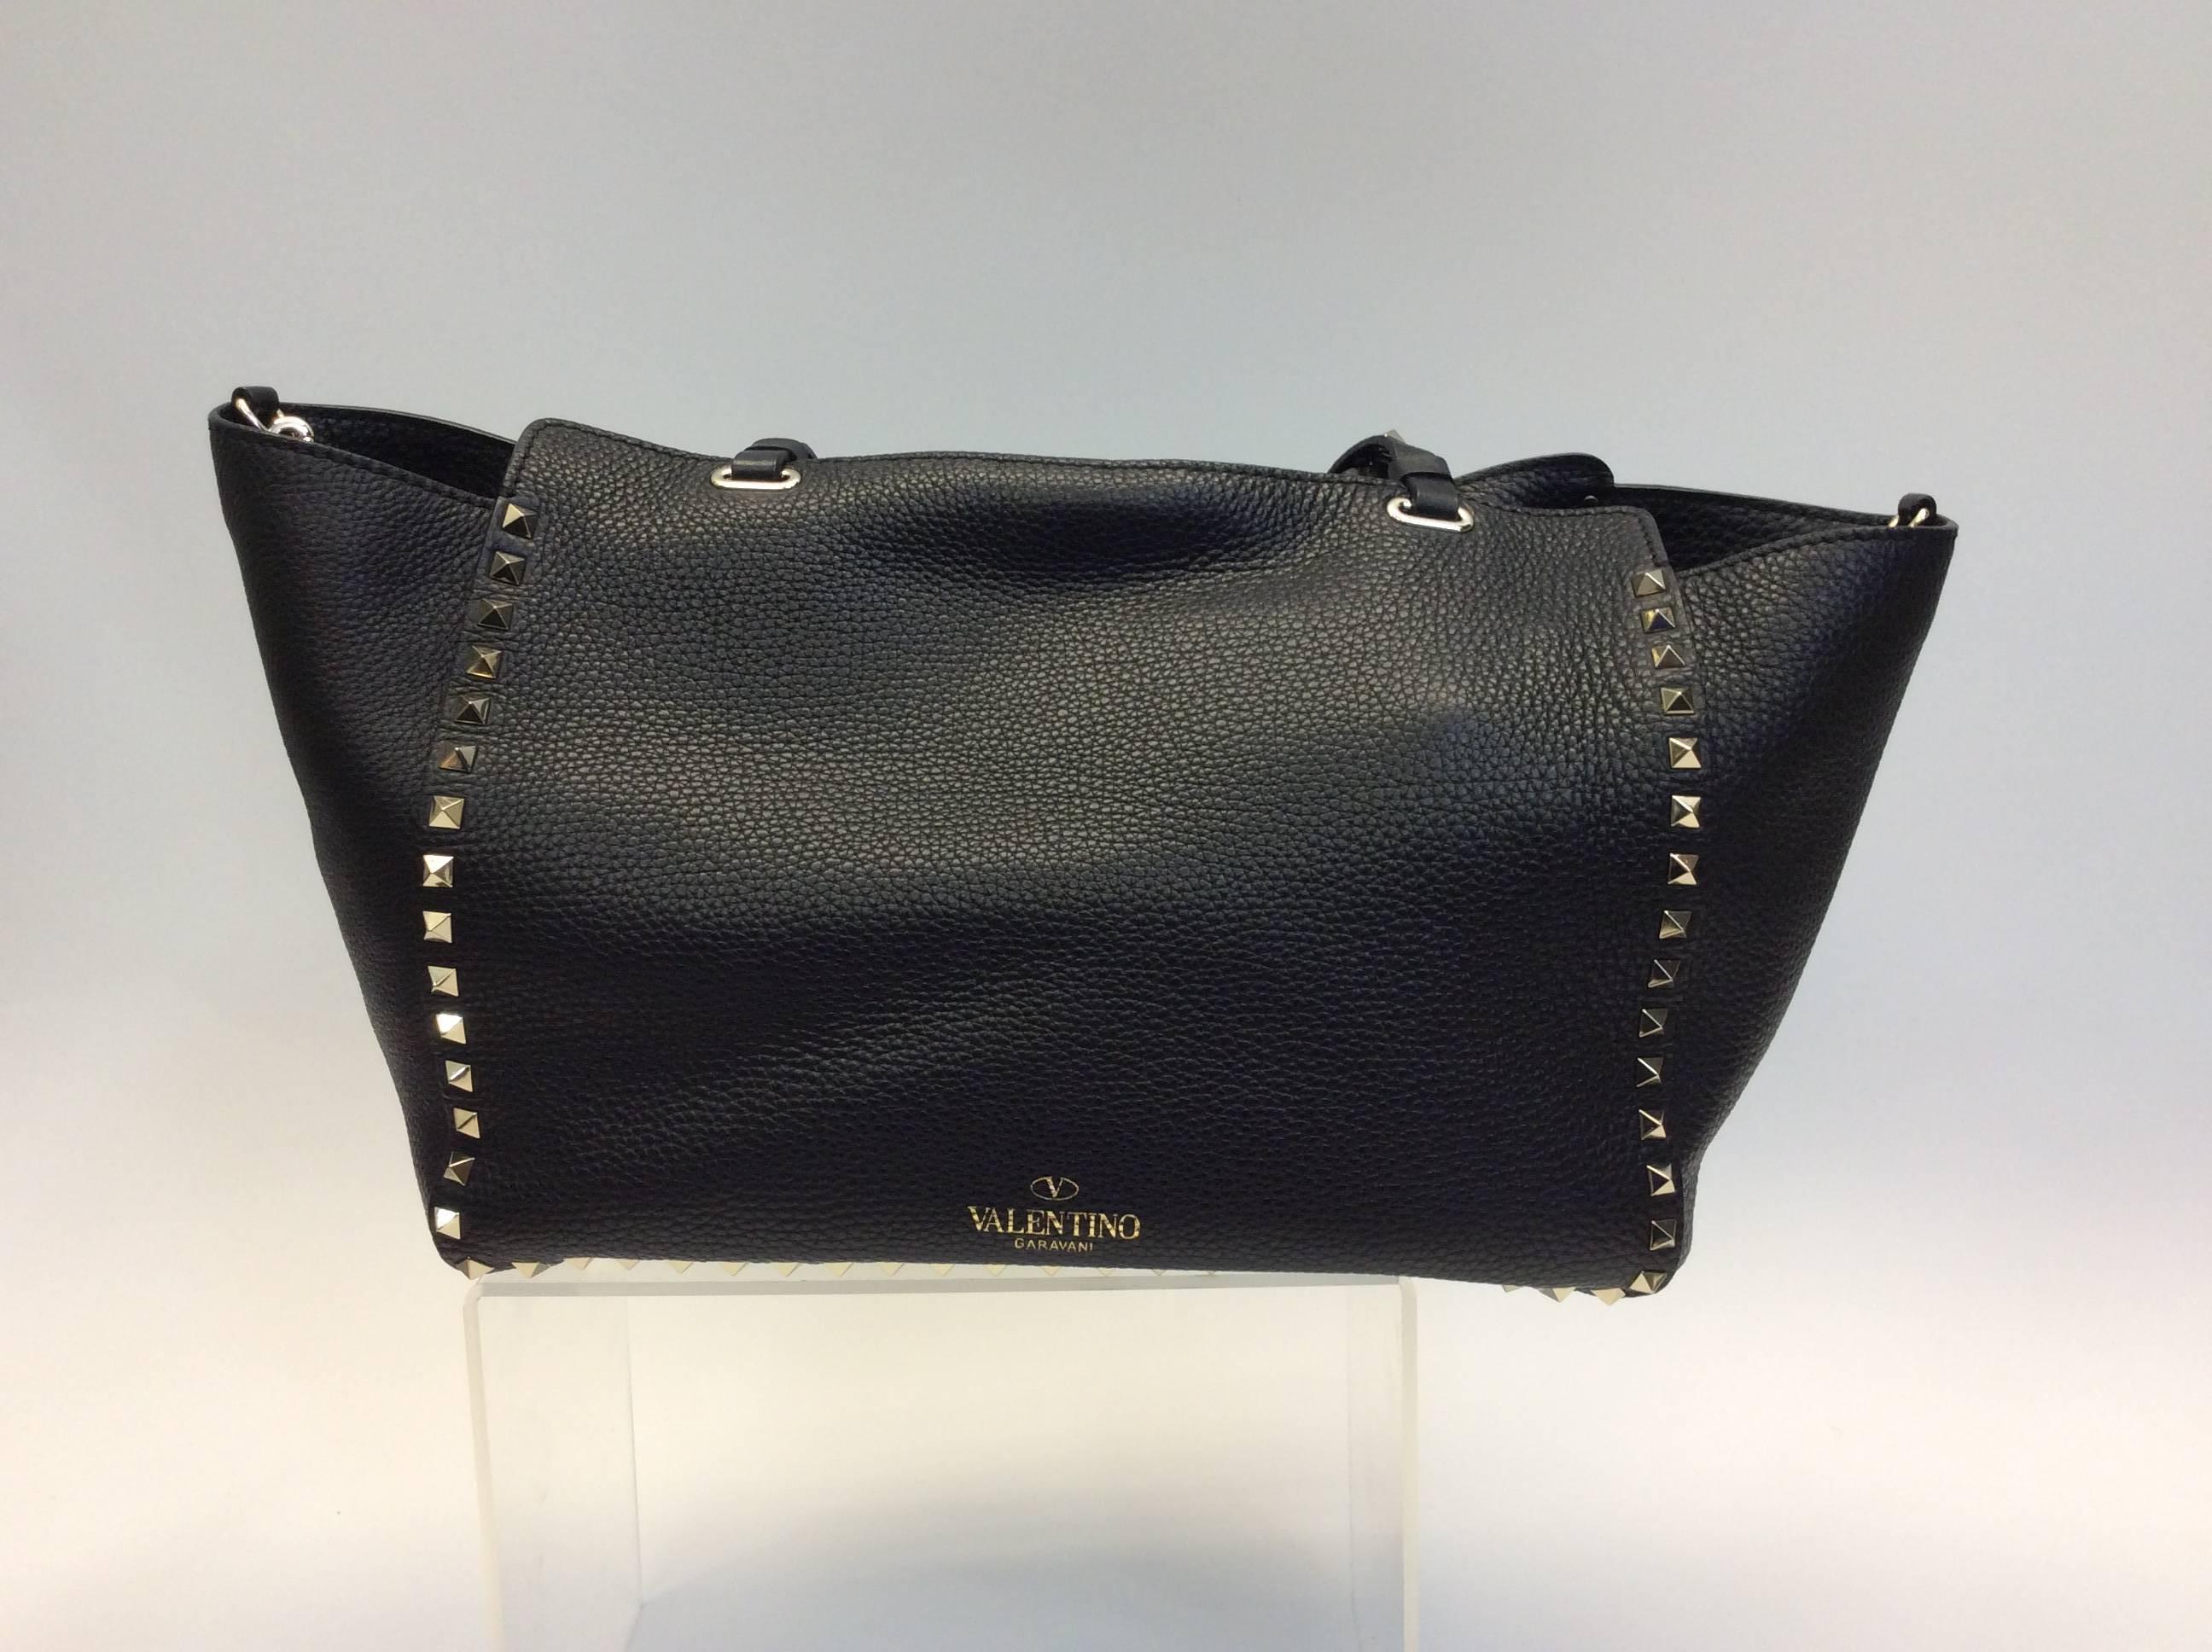 Valentino Black Leather Studded Shoulder Bag In Excellent Condition For Sale In Narberth, PA